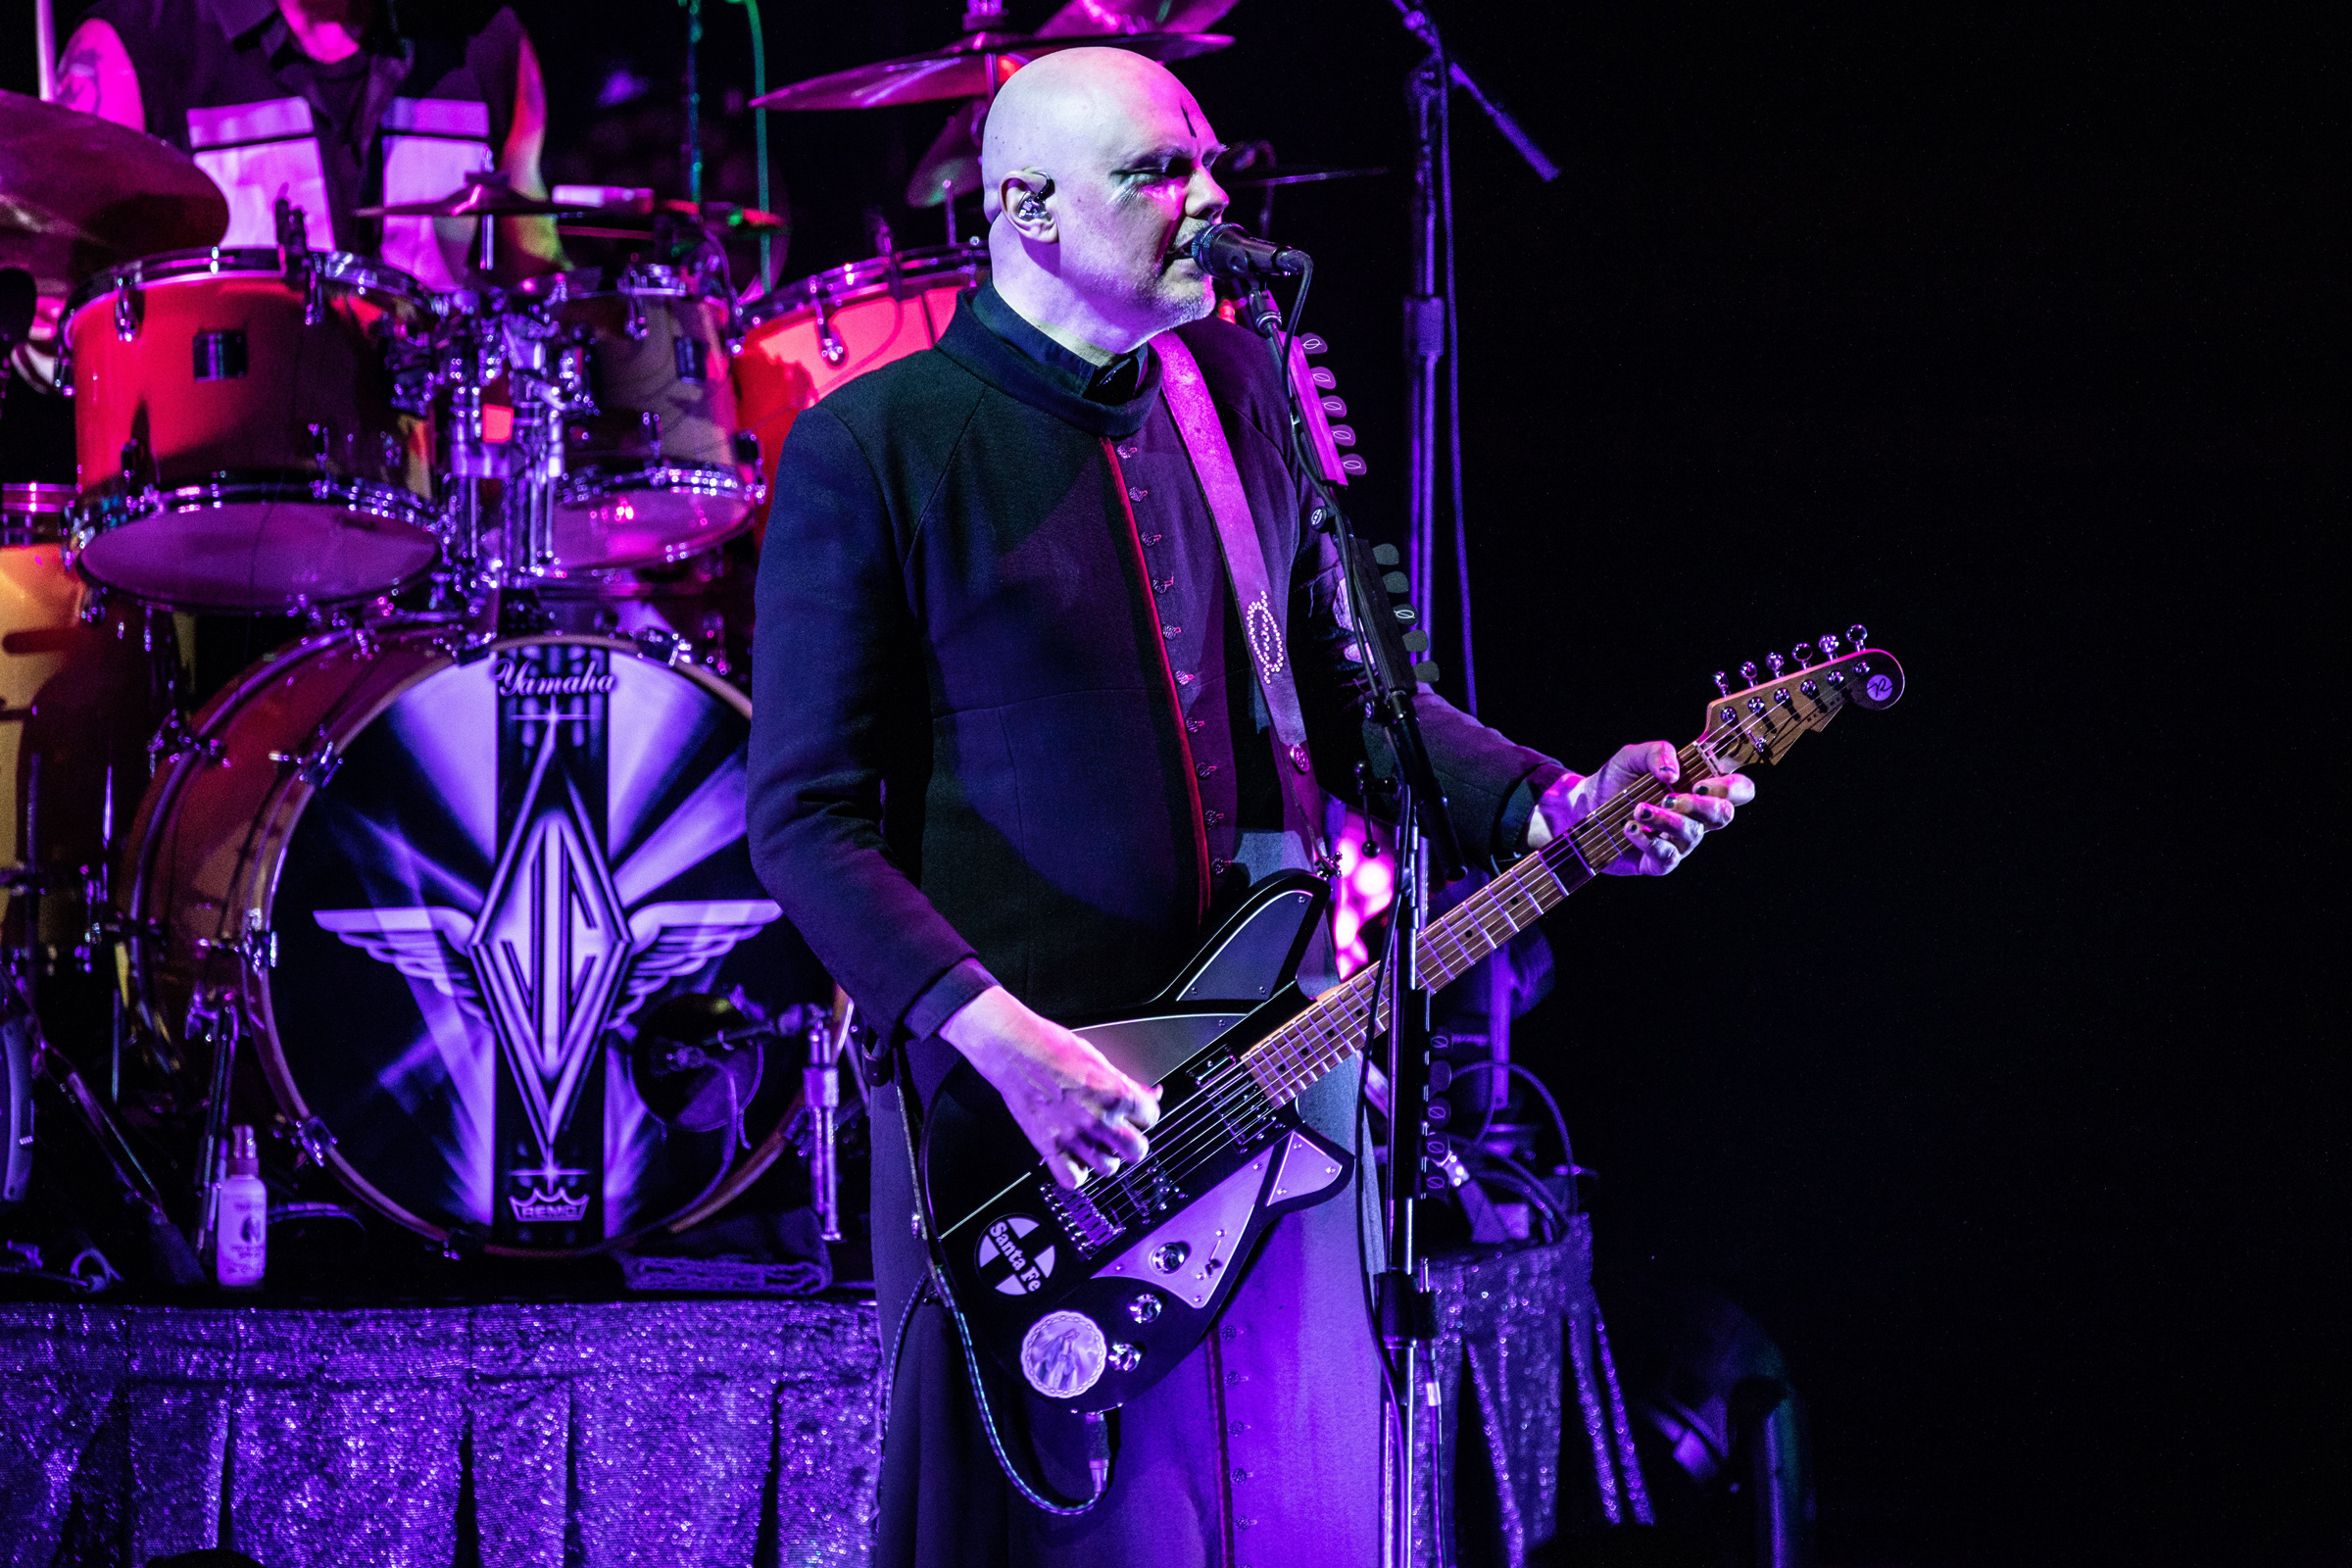 Billy Corgan fall tour, upcoming concerts, music performances, Rolling Stone article, 2400x1600 HD Desktop